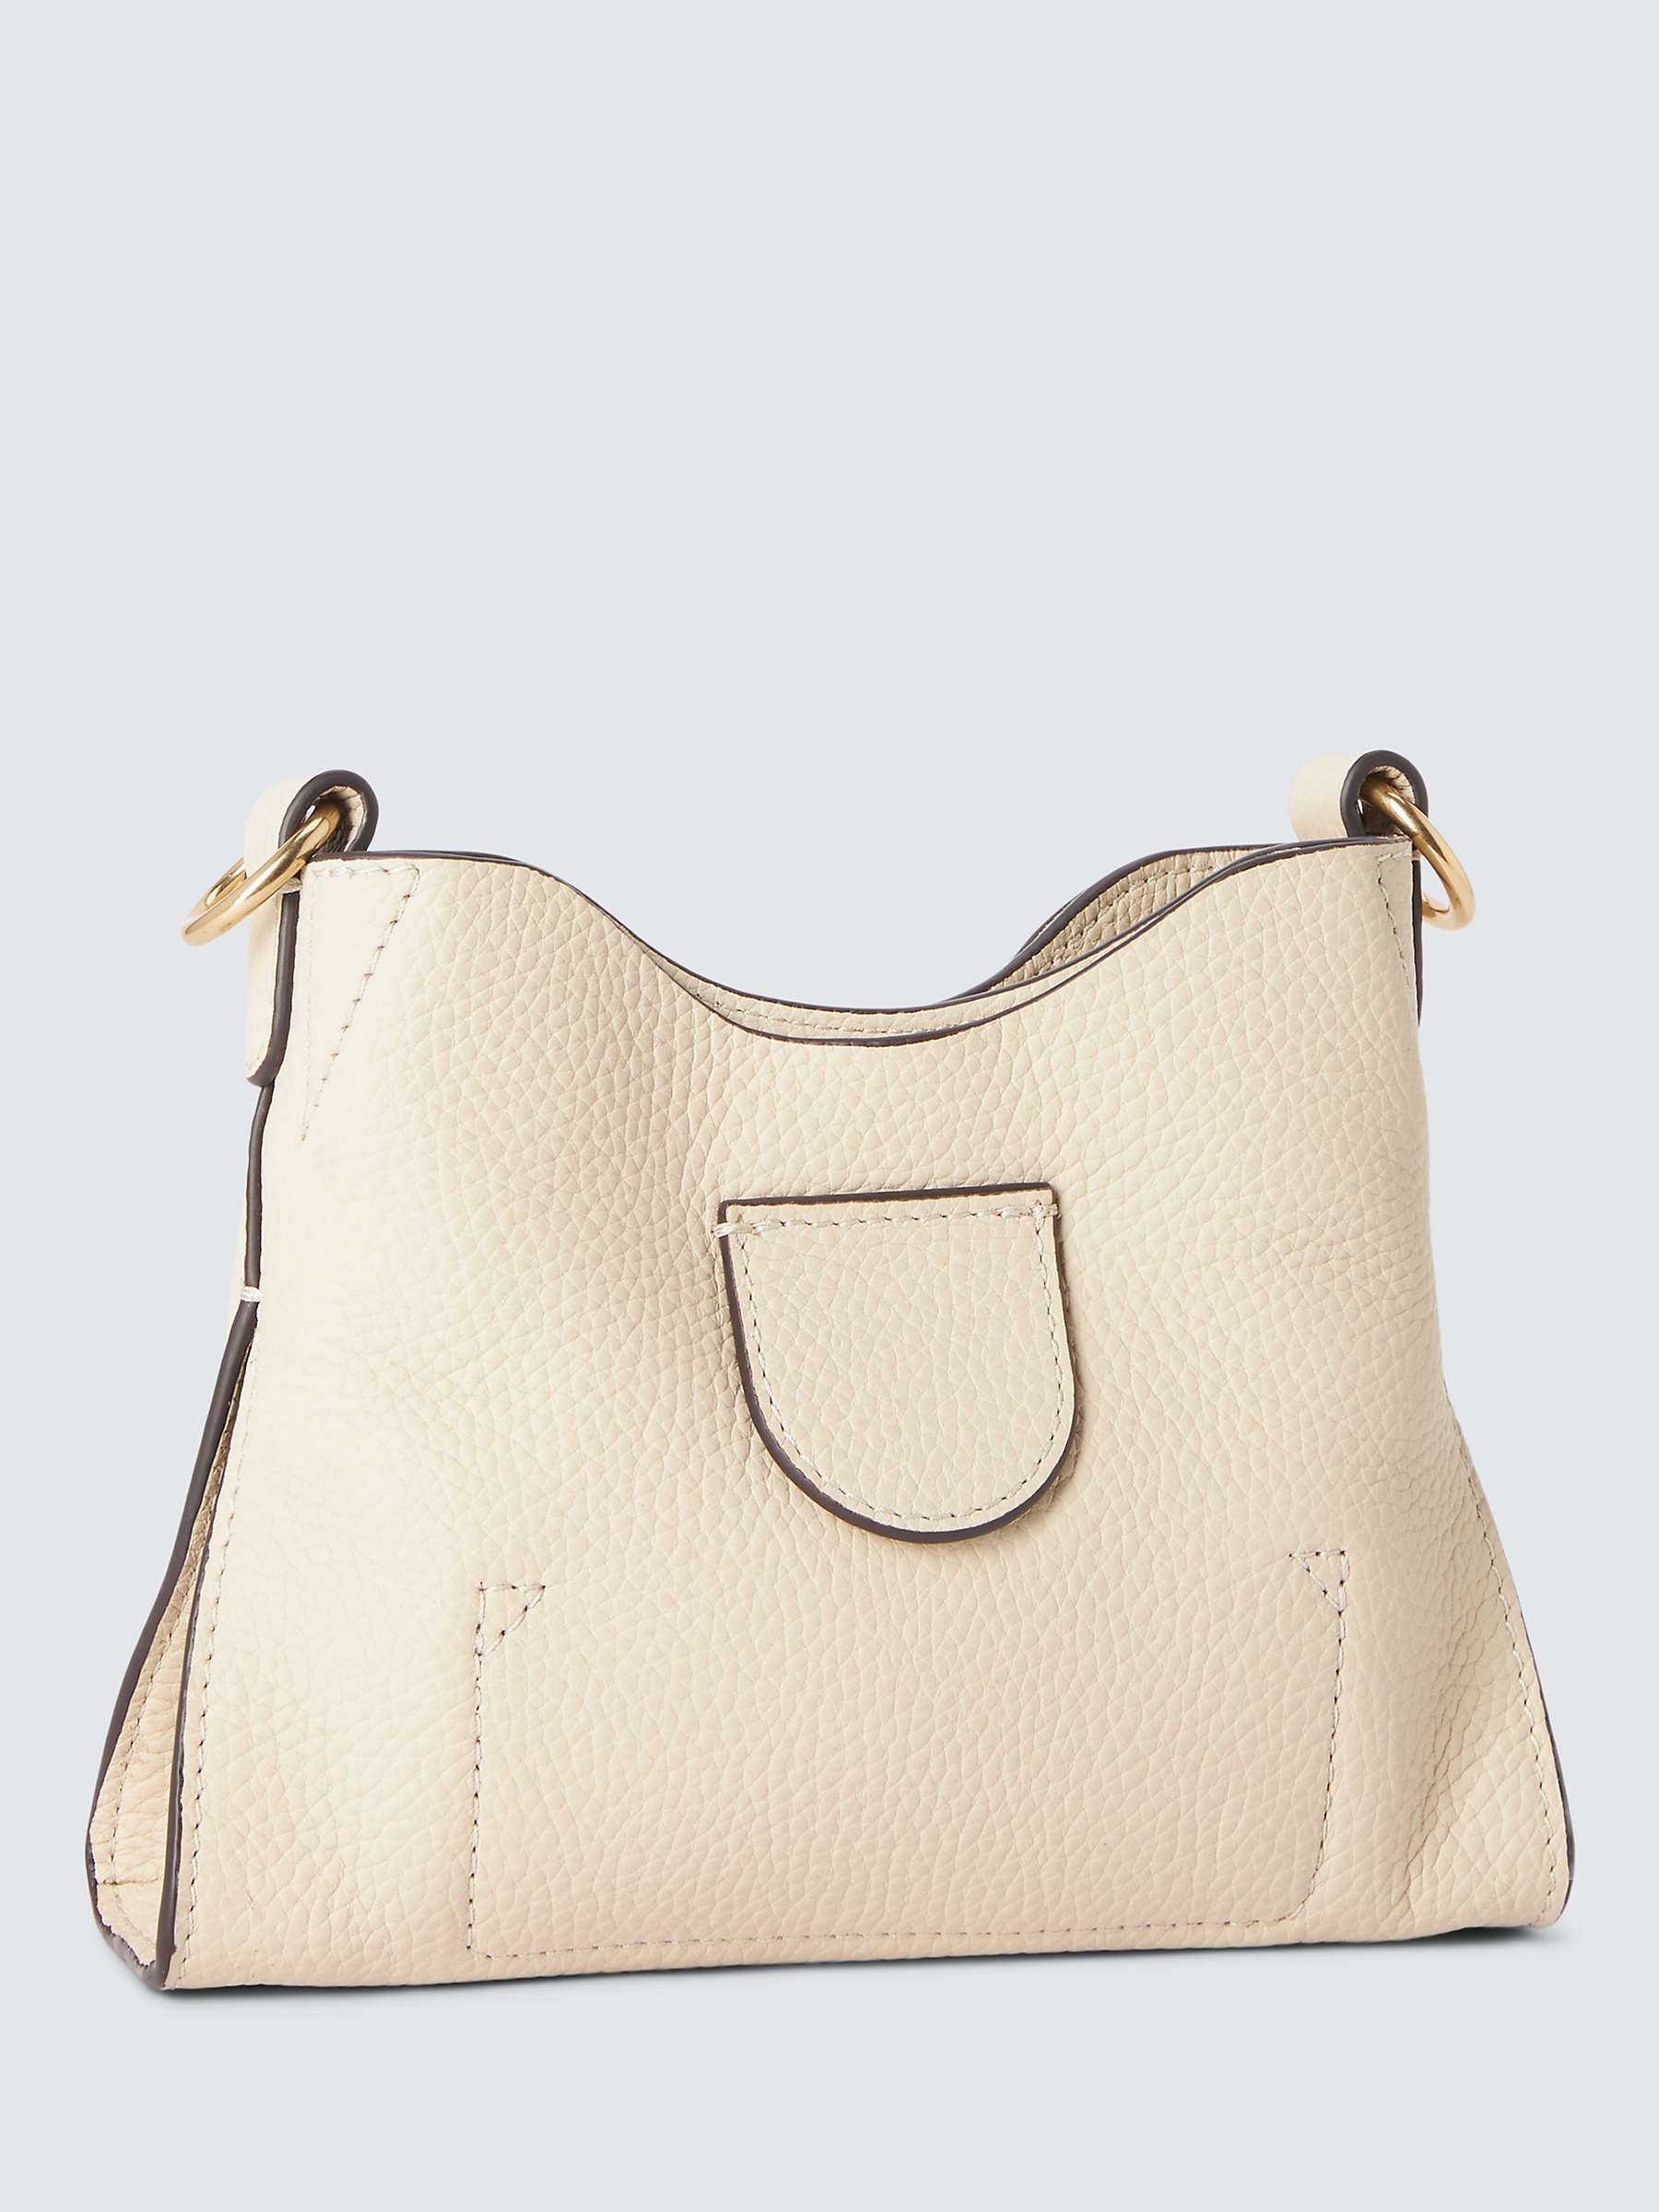 Buy See by Chloé Joan Small Leather Crossbody Bag Online at johnlewis.com